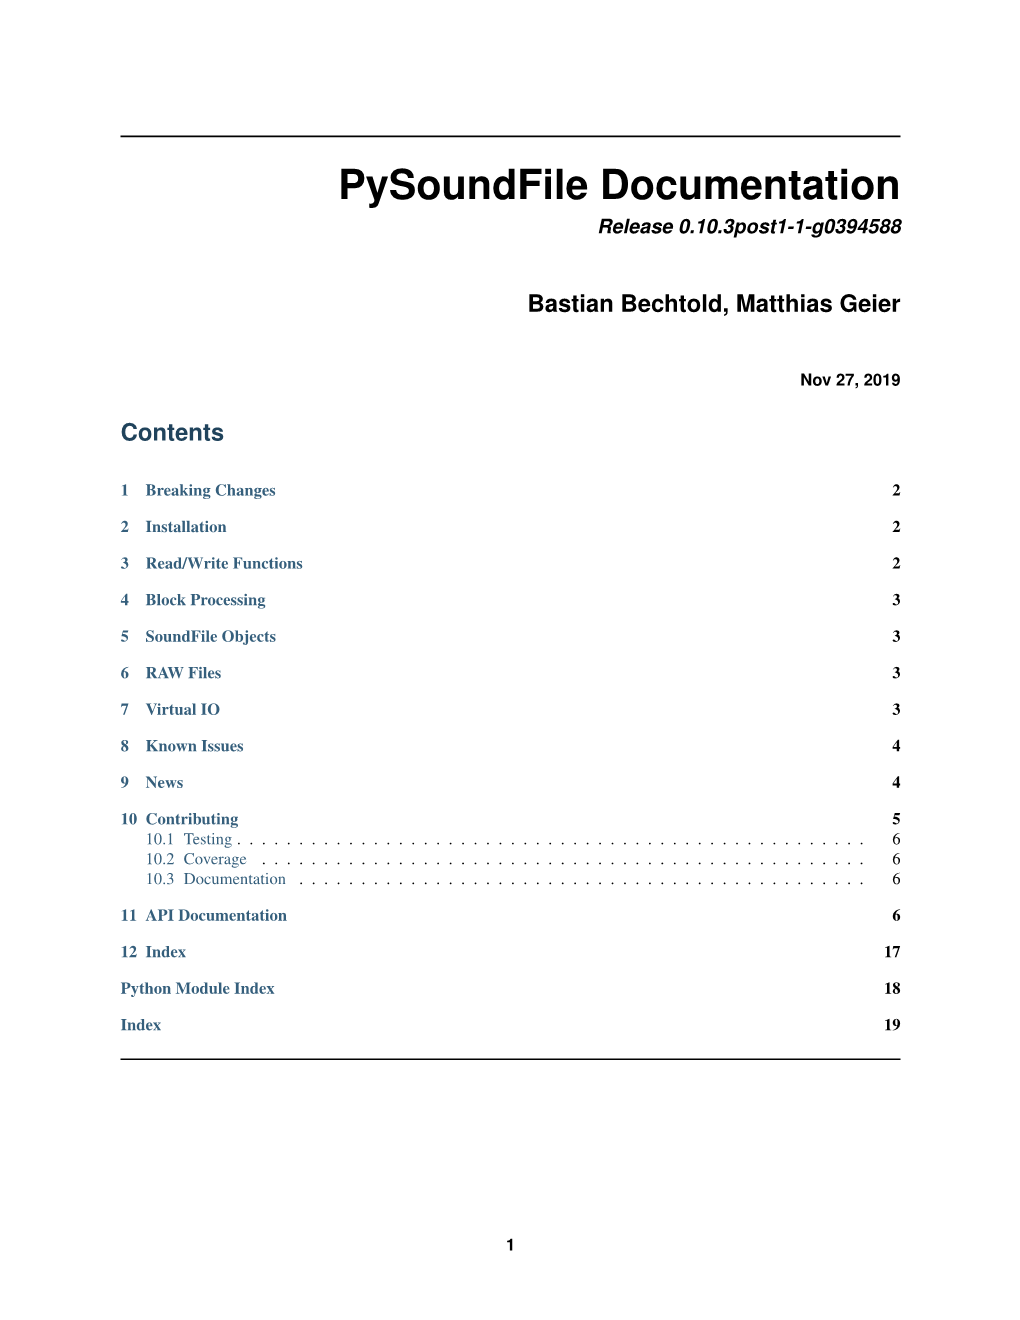 Pysoundfile Documentation Release 0.10.3Post1-1-G0394588